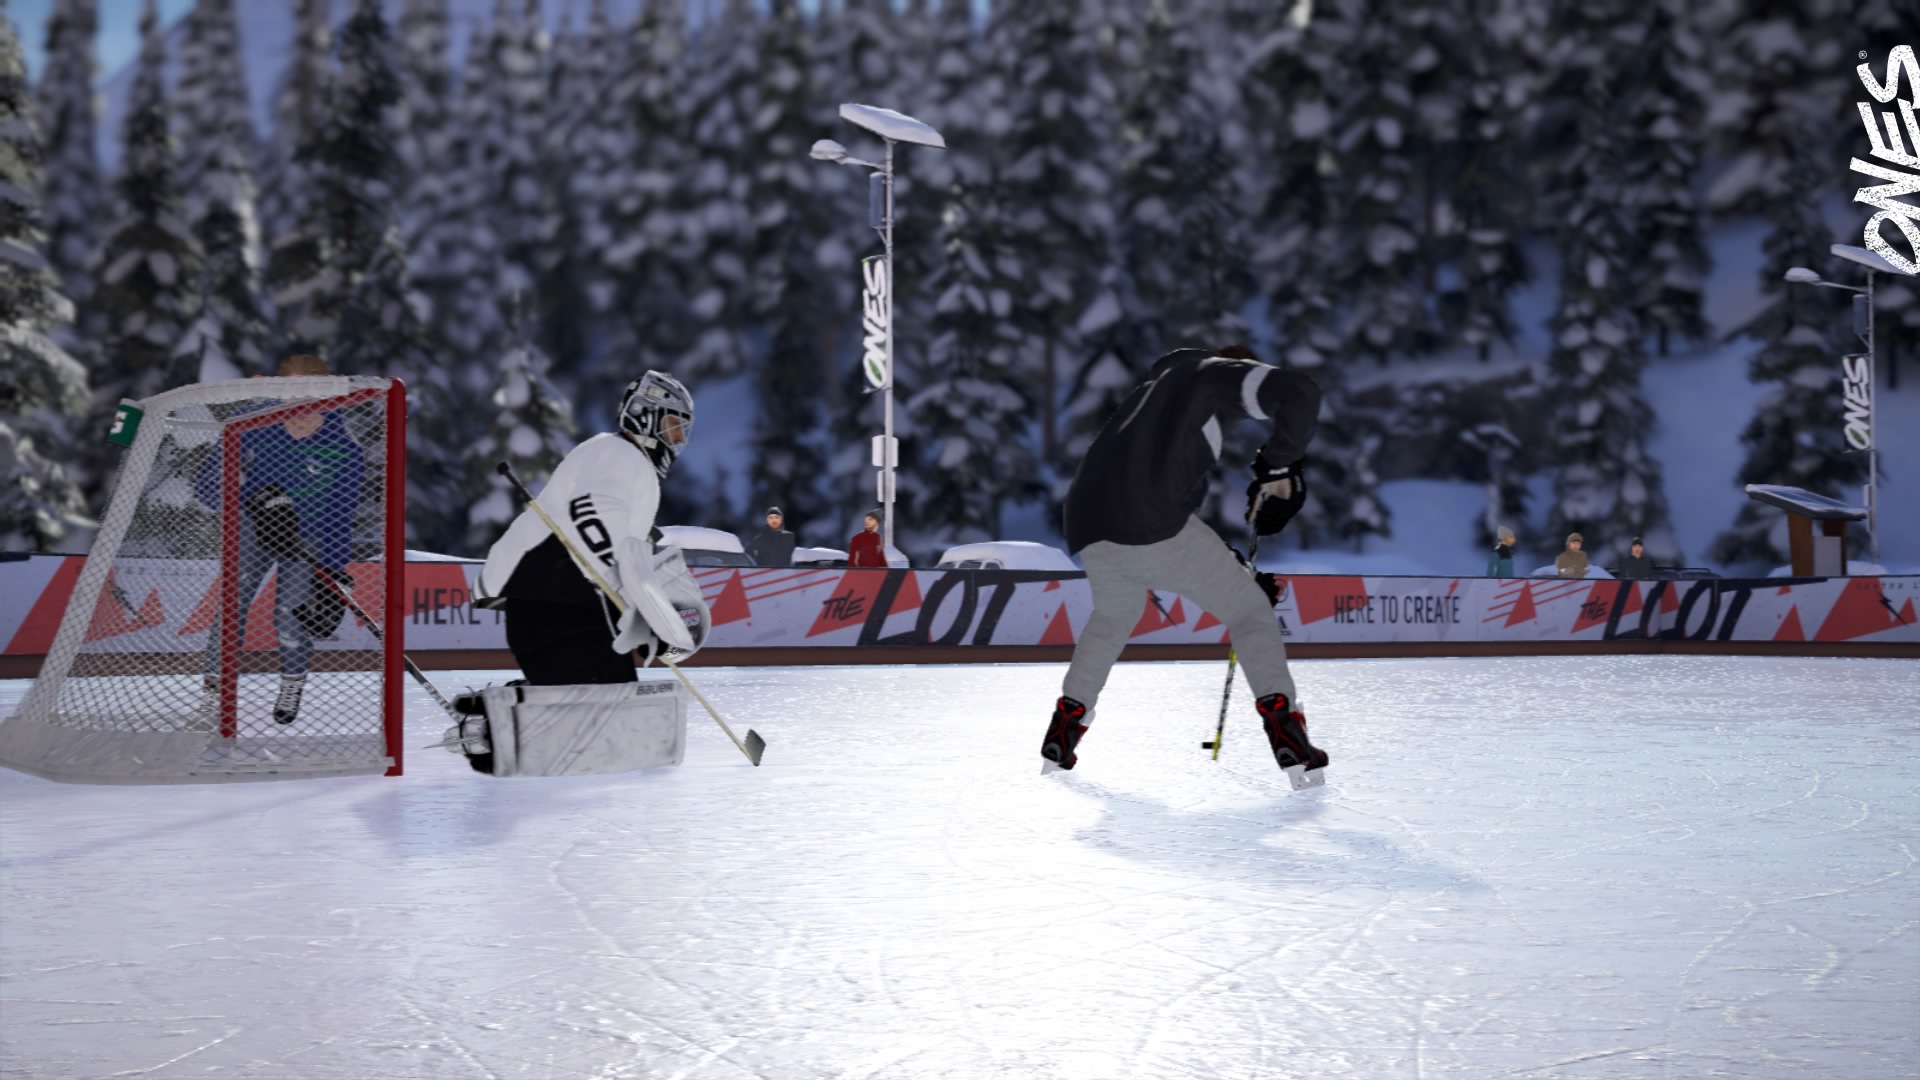 NHL 20 Review